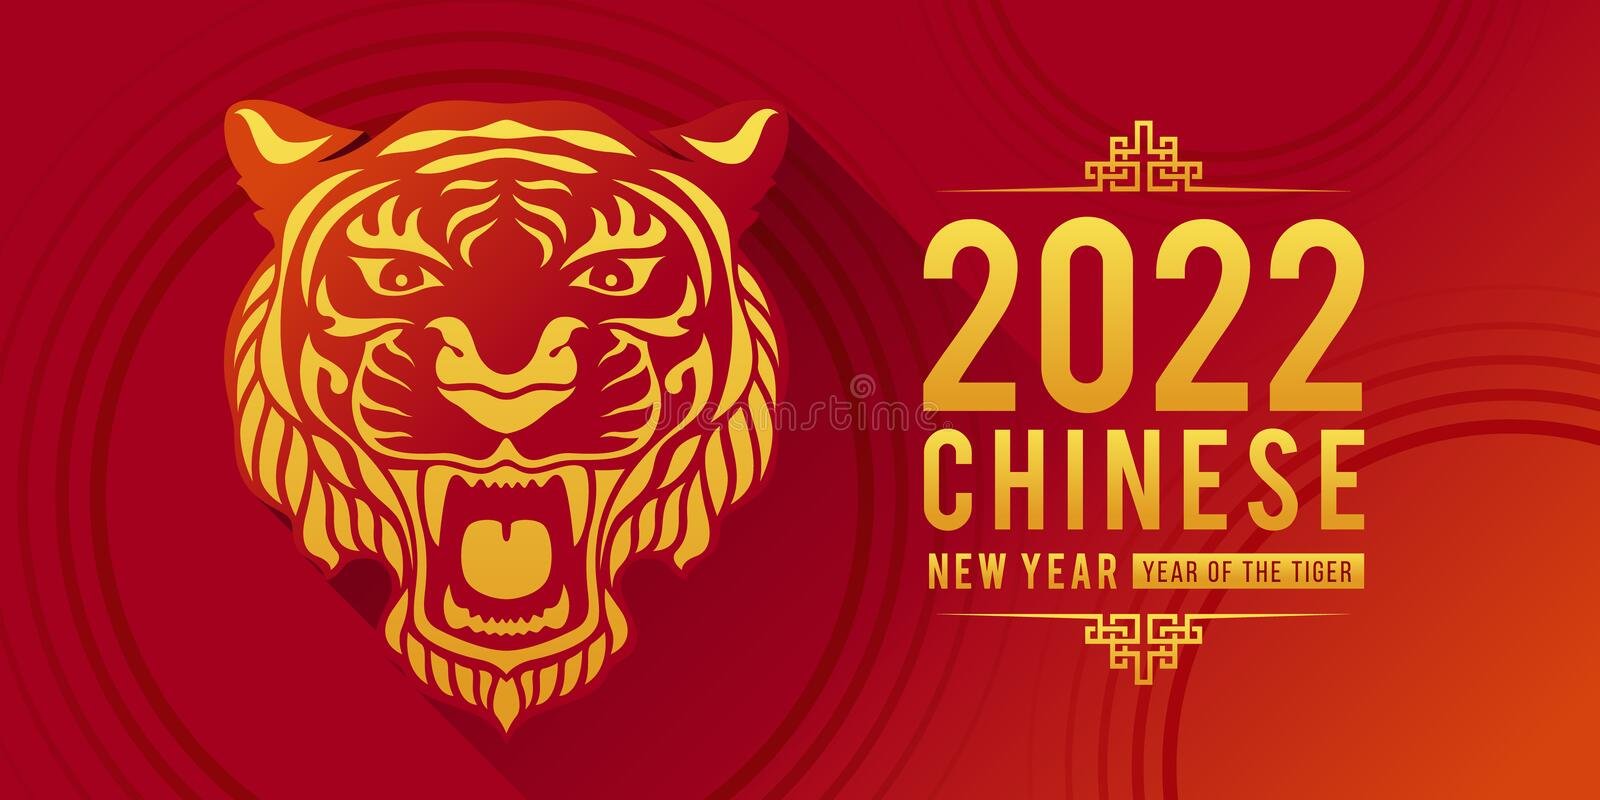 chinese-new-year-tiger-red-gold-head-zodiac-sign-abstract-circles-texture-background-vector-design-217190075